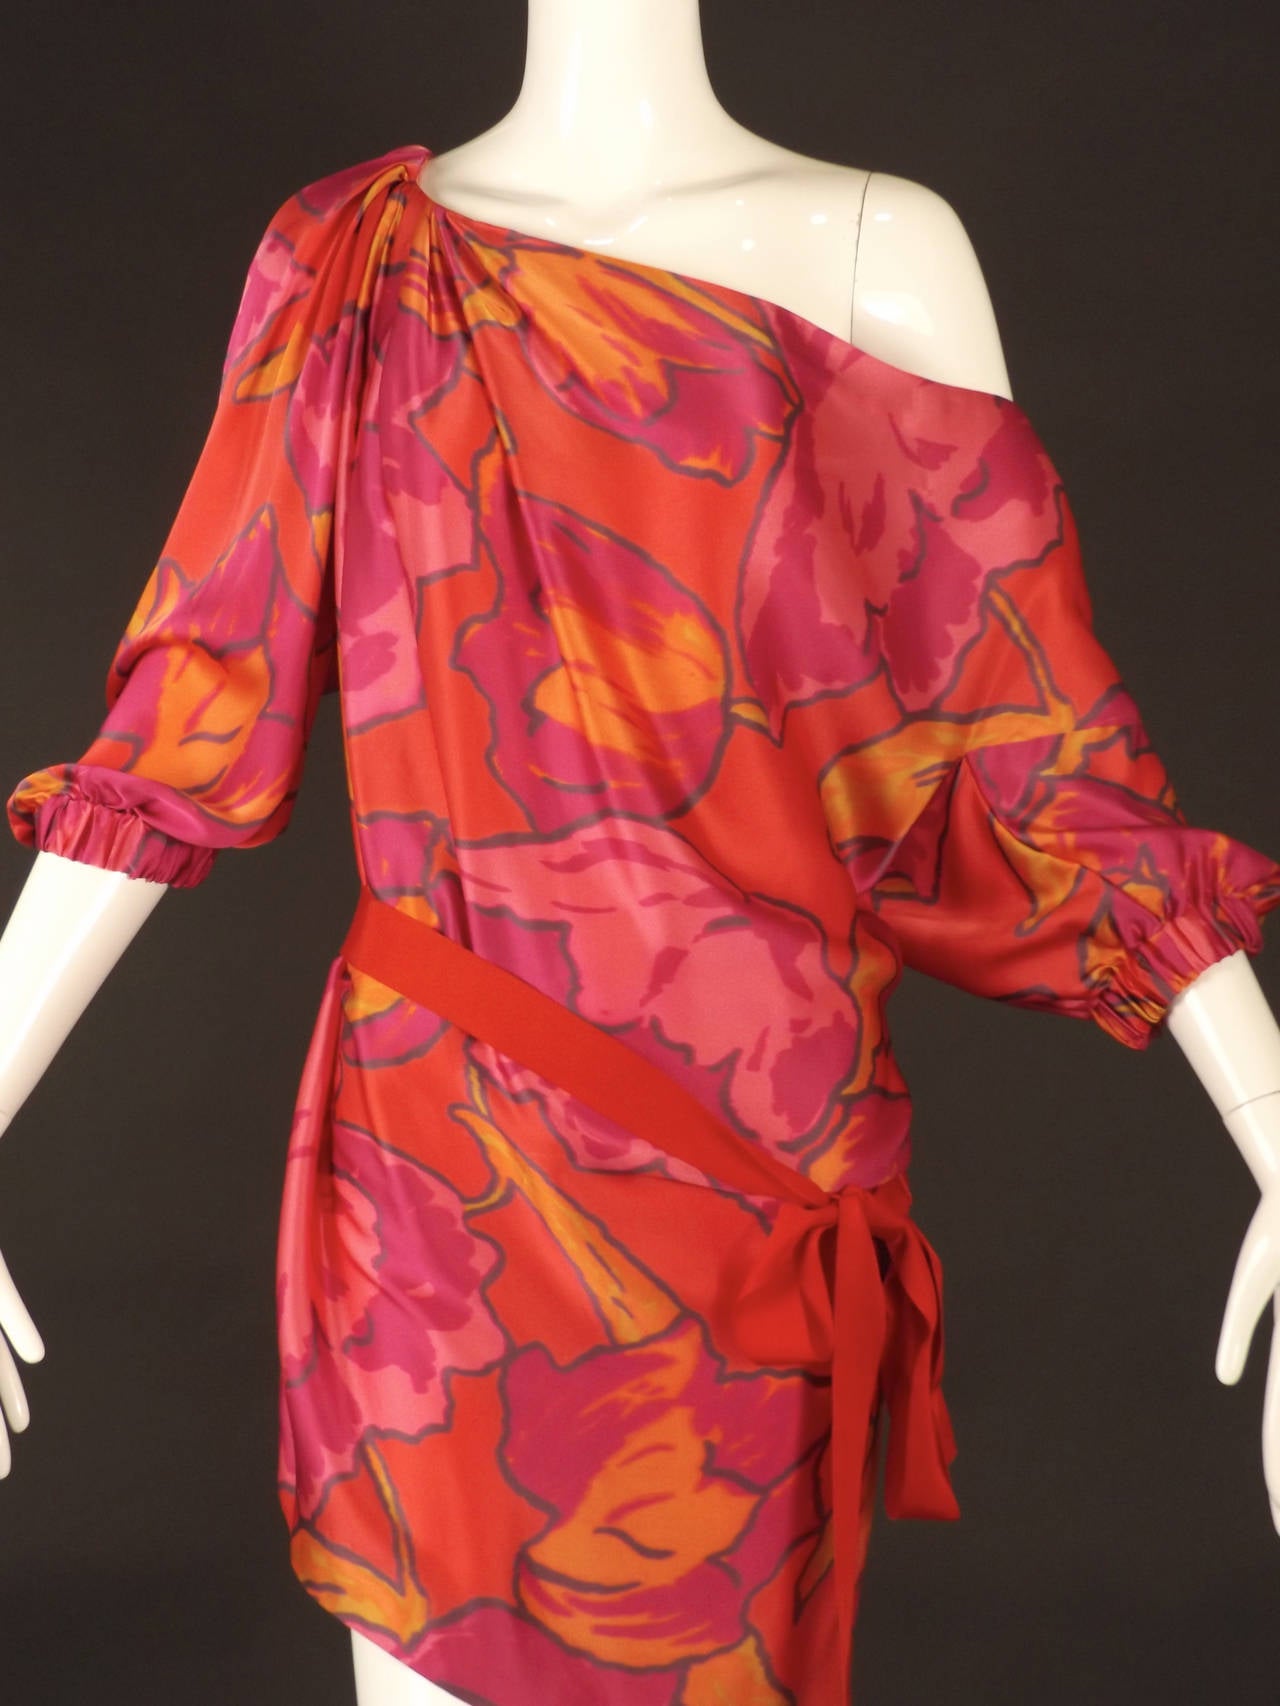 Summer, 2010 Runway Collection. This fabulous dress is in a pink, orange and black printed silk satin. One shoulder with pleats falling from the shoulder and draping the fabric down the body of the dress. Elastic gathered bands at the base of the